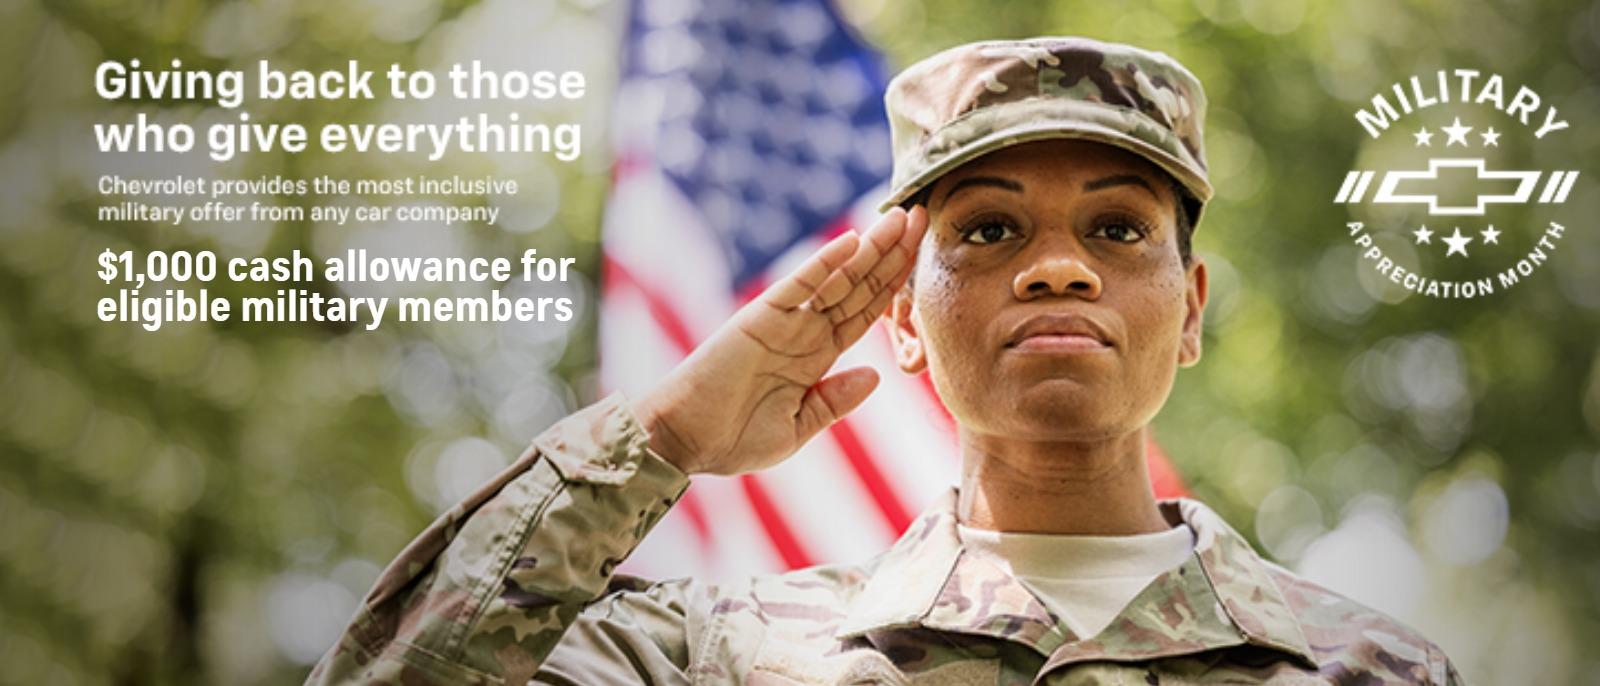 $1,000 cash allowance for eligible military members